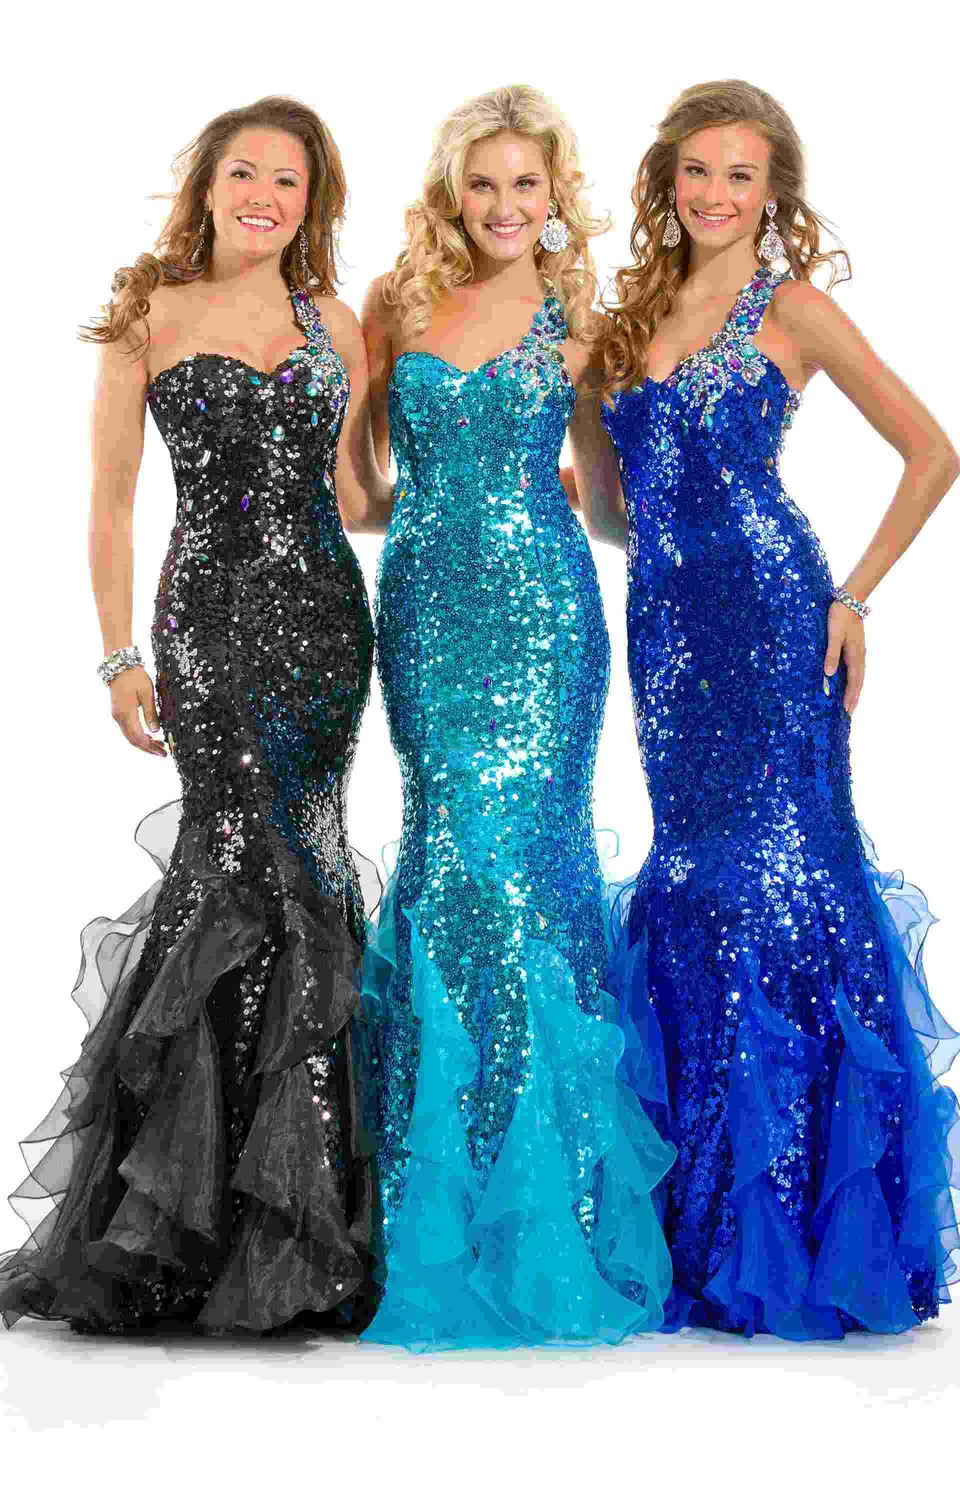 Best-Fashion-Prom-Dresses-2013-NEW-HOT-One-Shoulder-Sequin-Color-Beads ...